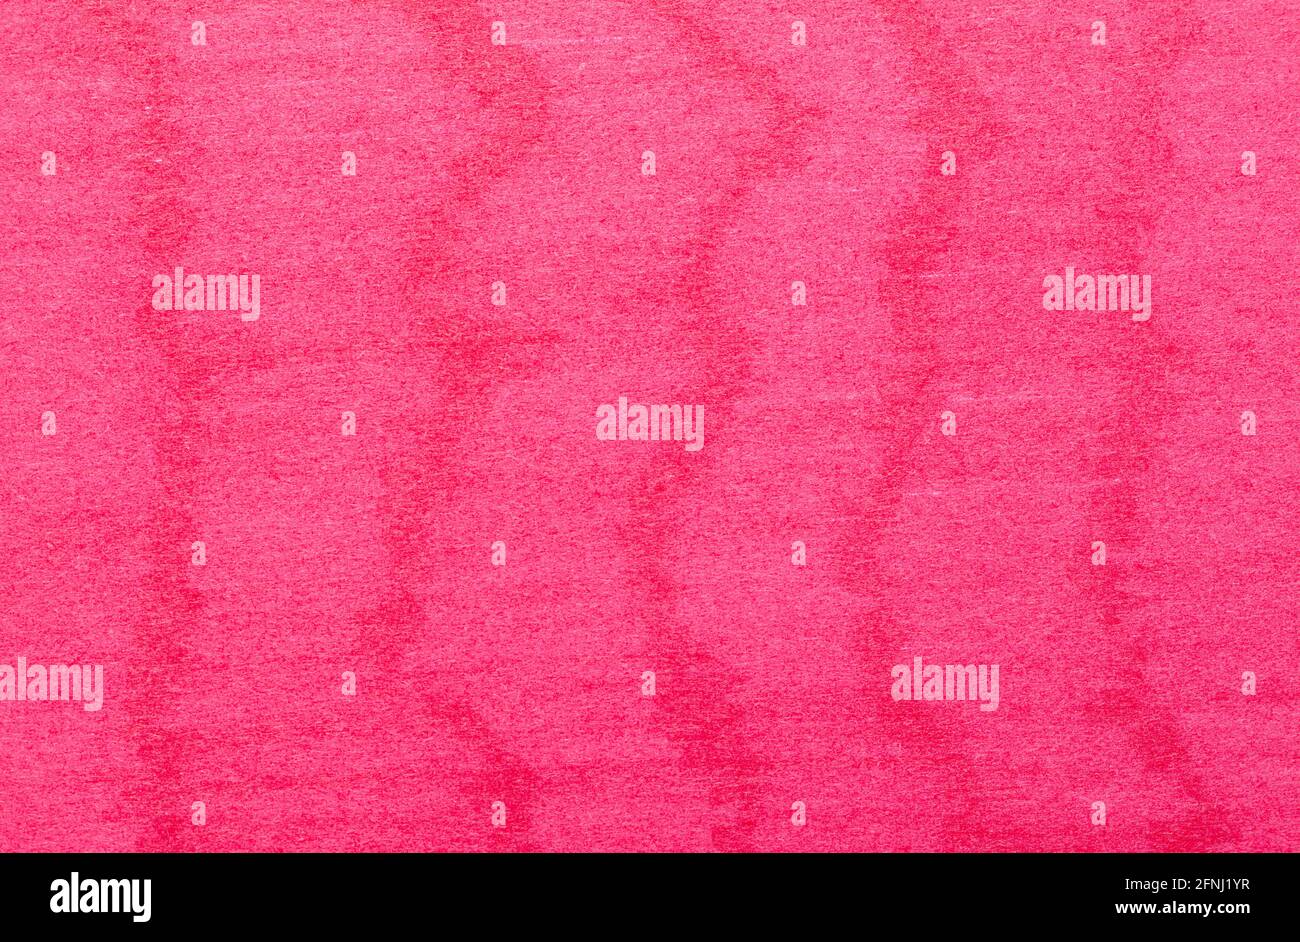 Red Permanent Marker Scrible Pattern Background Texture Stock Photo